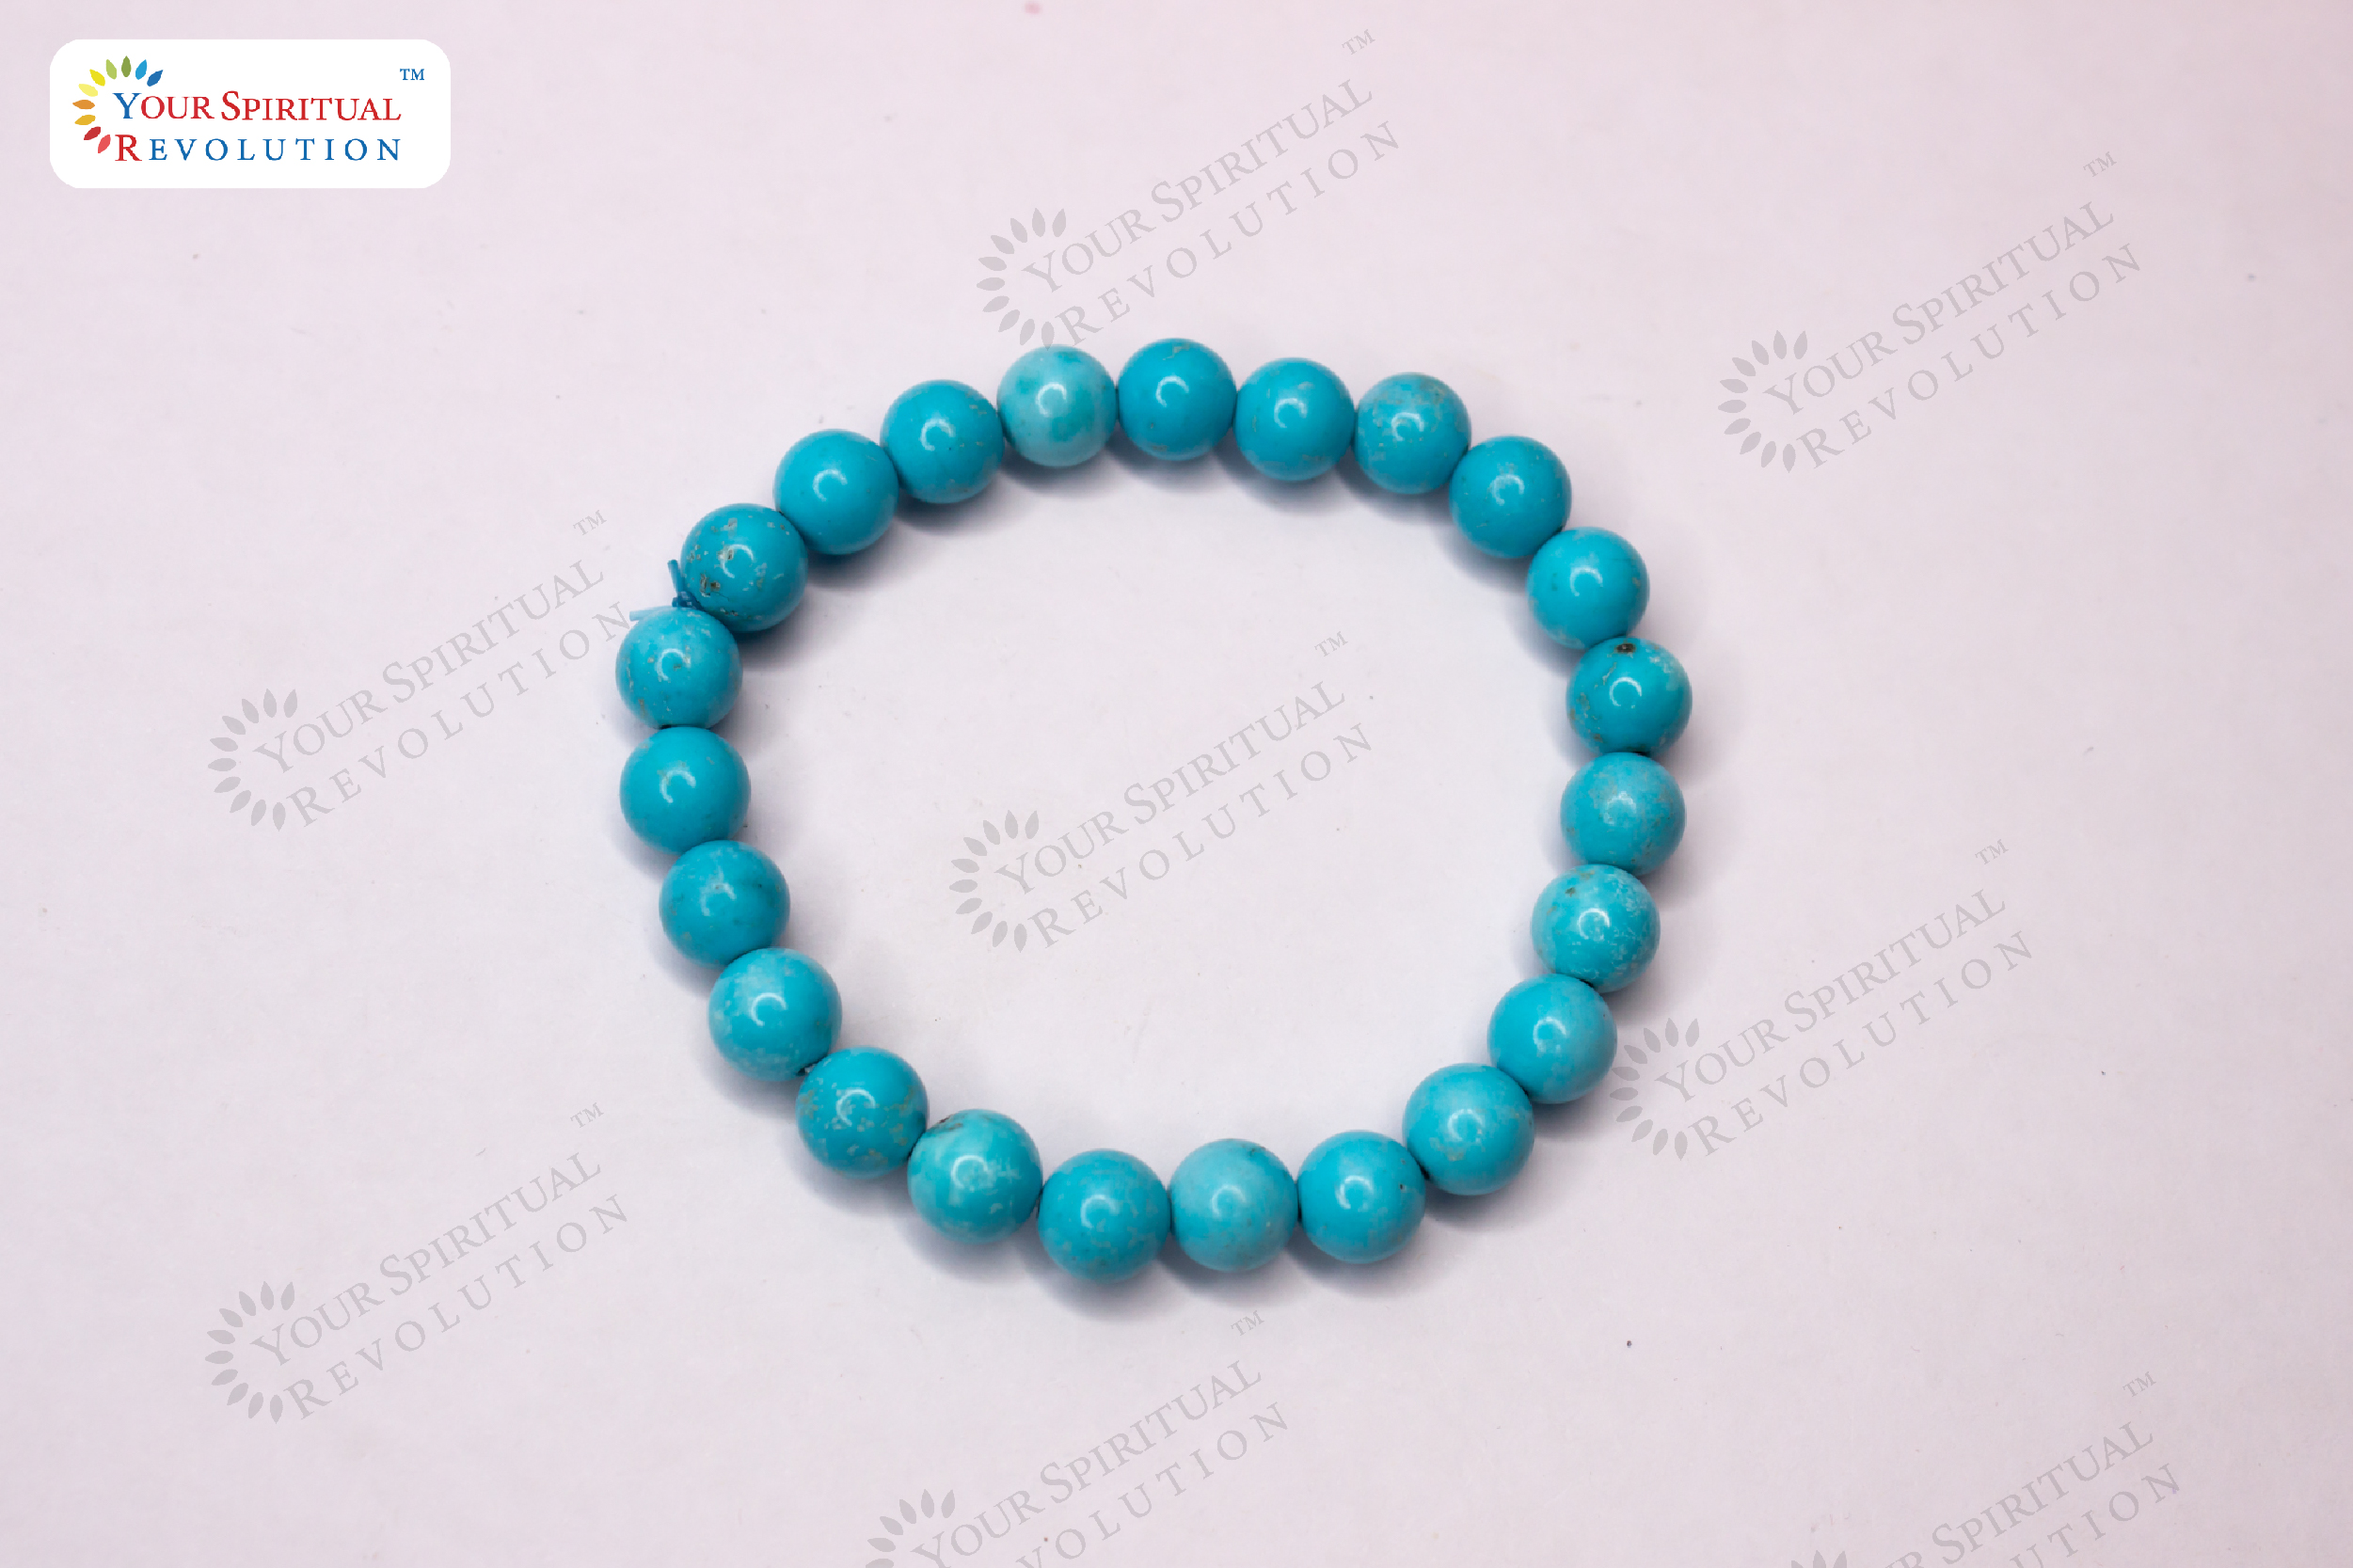 Buy Fame and Success Turquoise Miracle Crystal Bracelet Online From Premium  Crystal Store at Best Price - The Miracle Hub